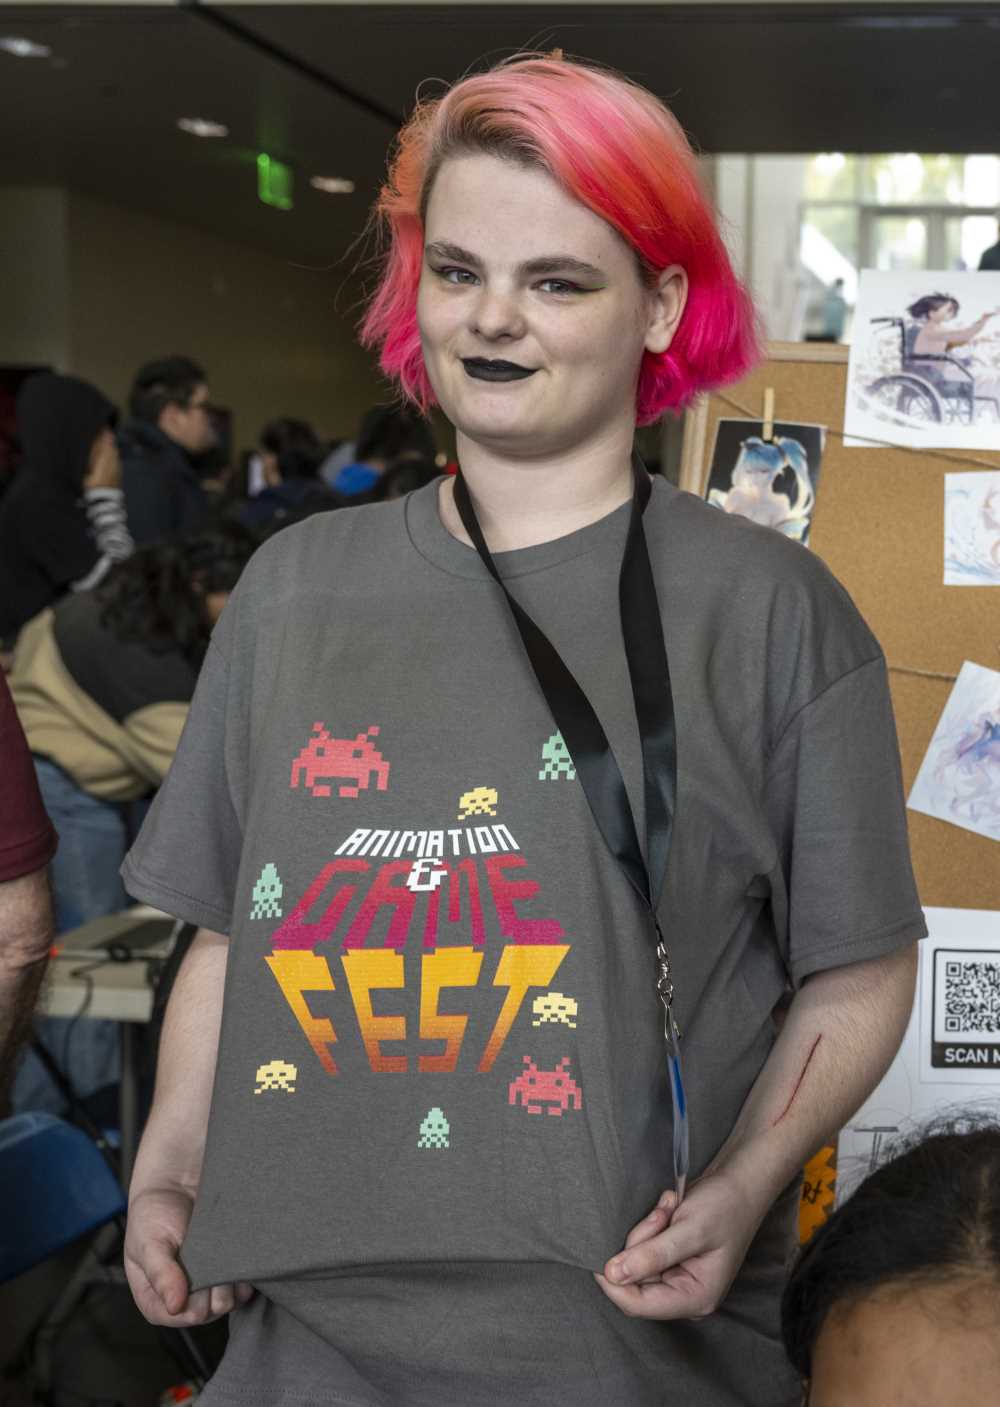 Student wears an Animation & Gamefest t-shirt